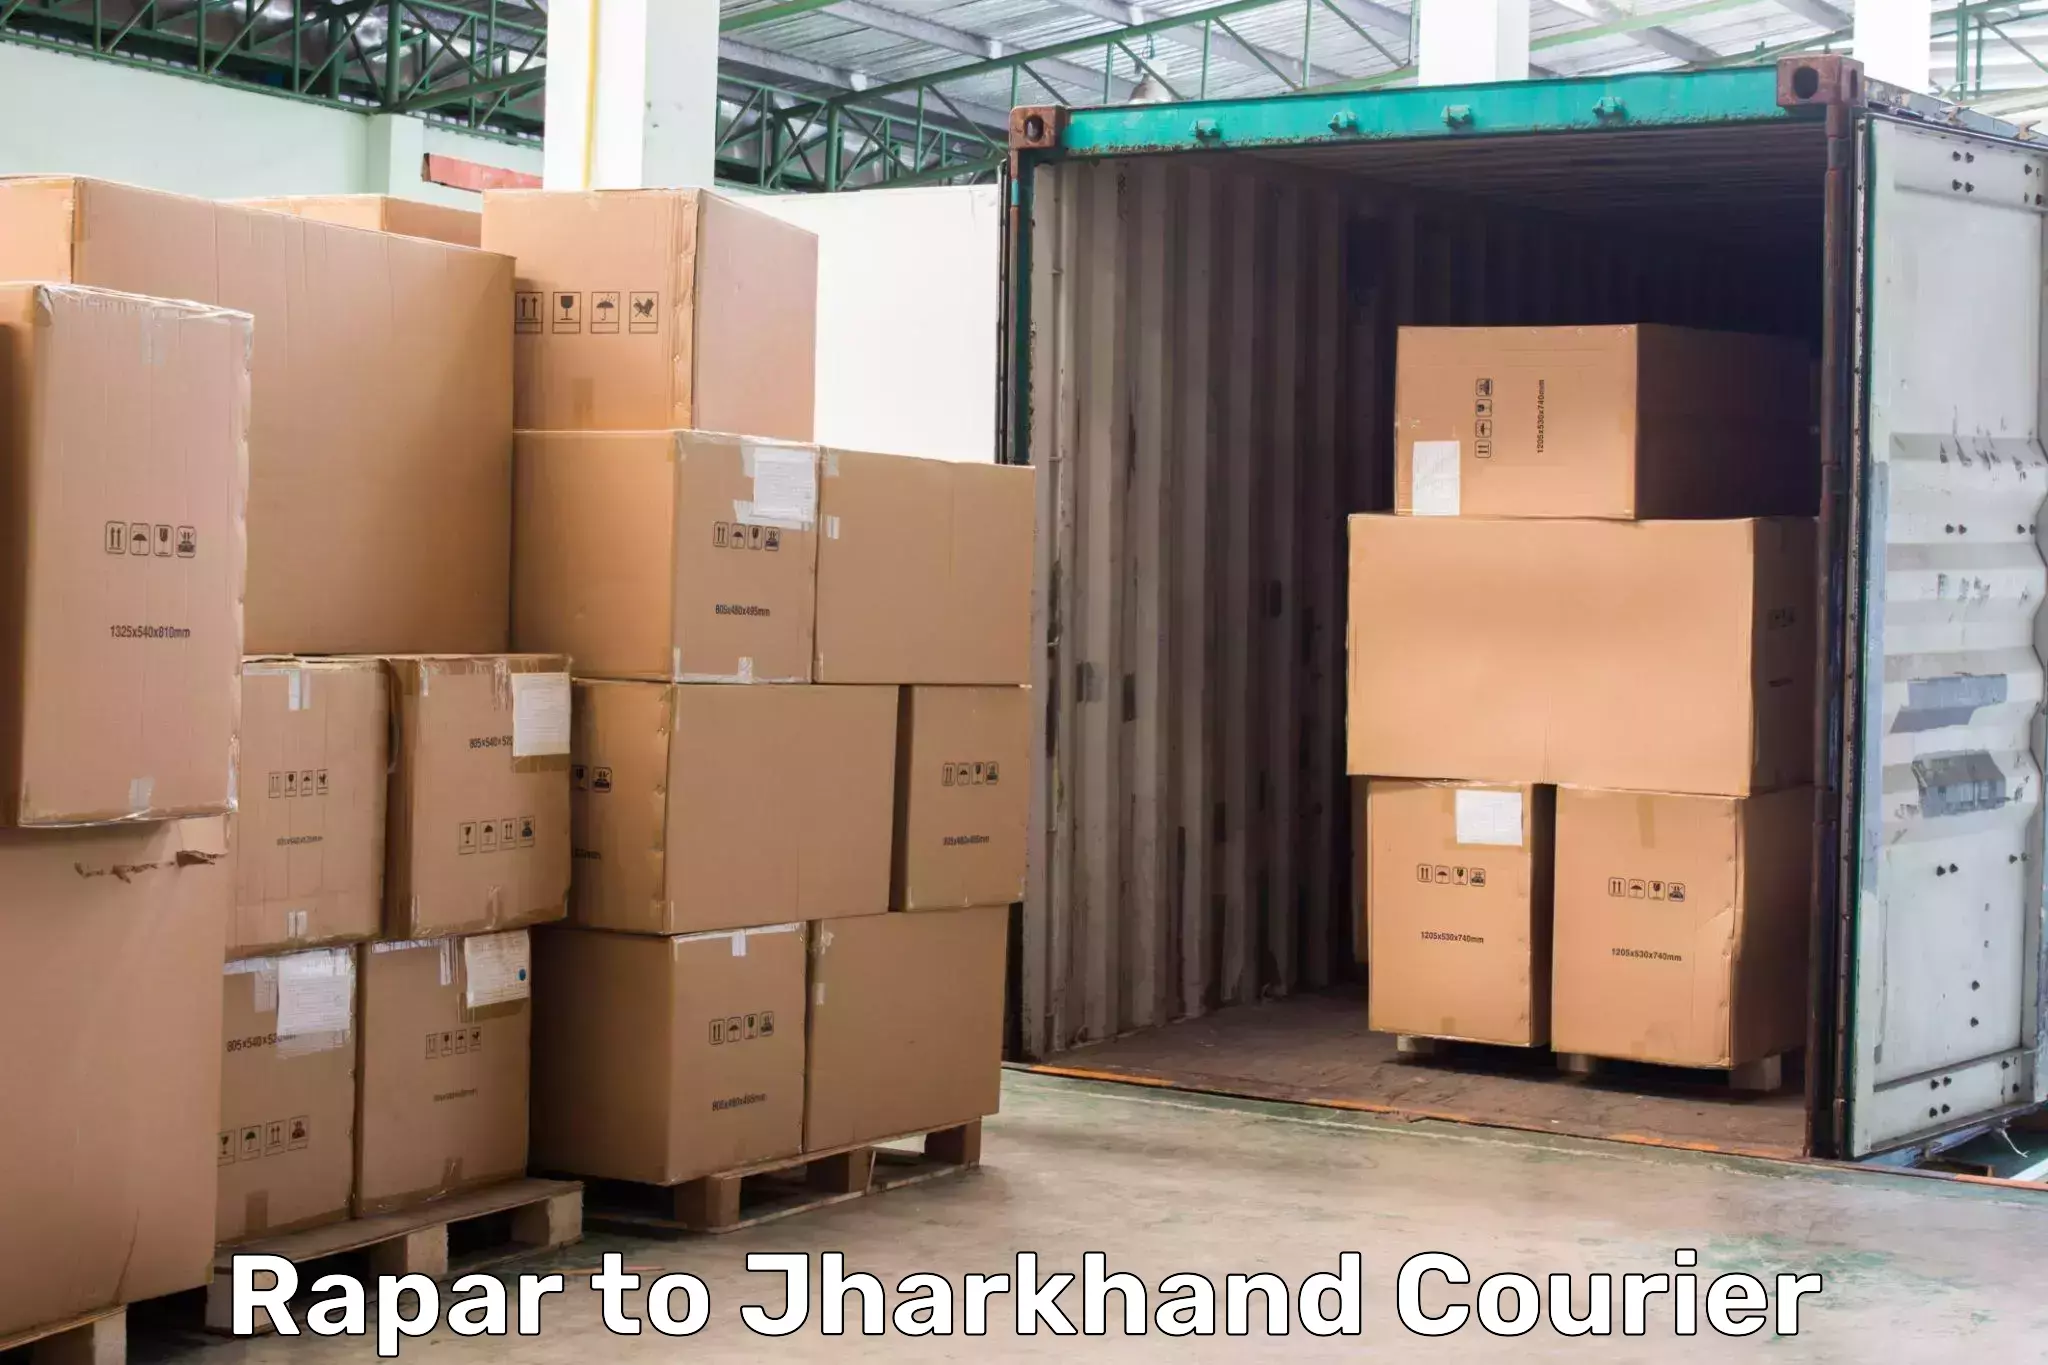 Speedy delivery service in Rapar to Jharkhand